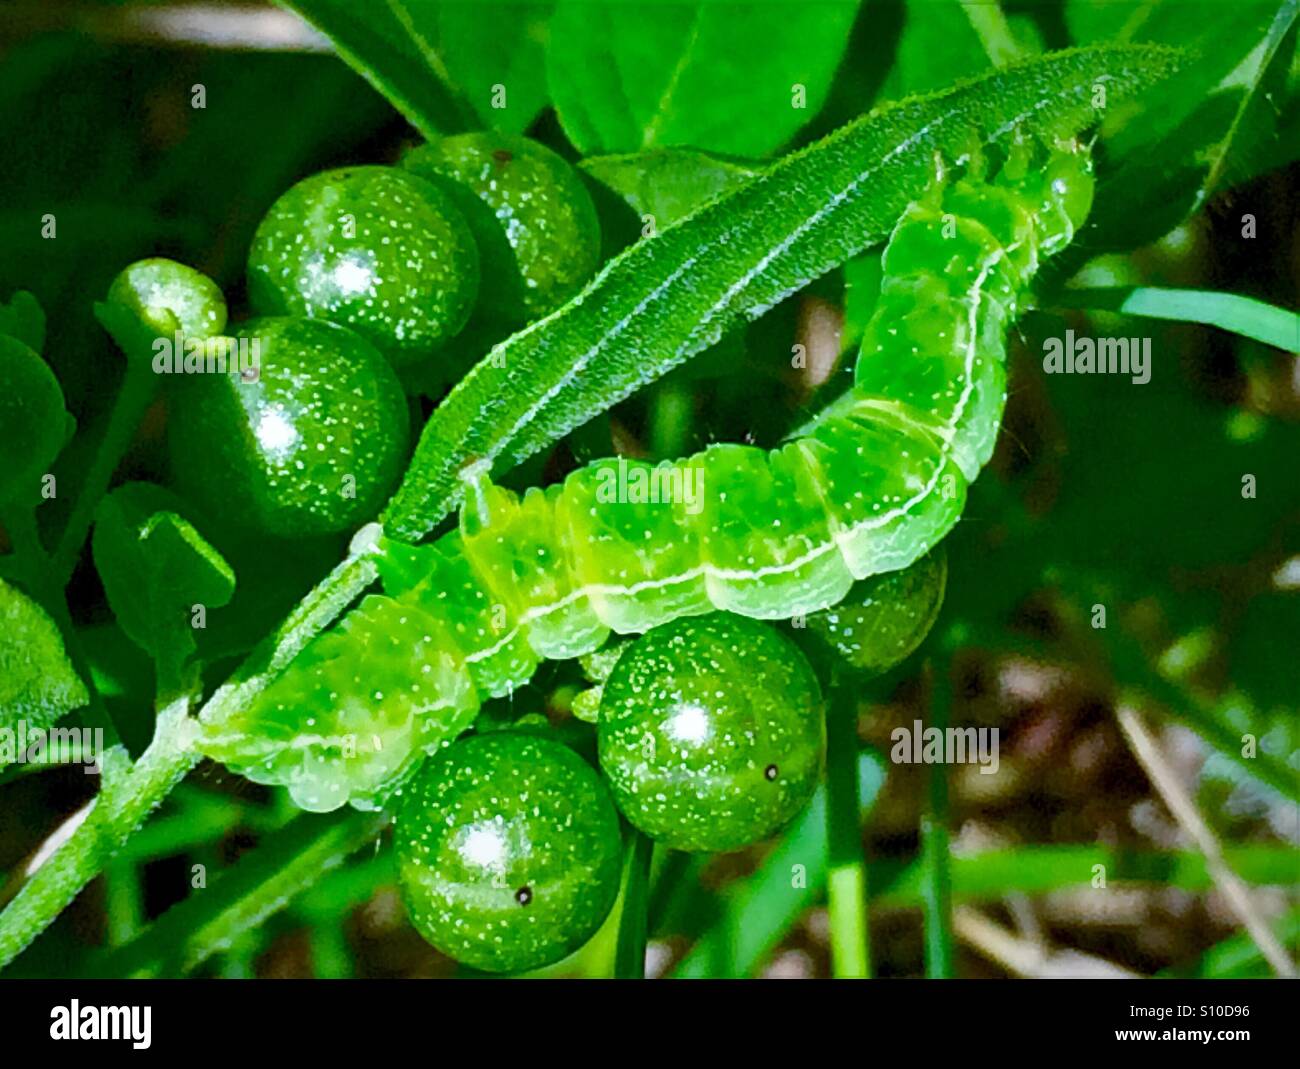 Macro view of a green caterpillar with green berries on a green background, Cabbage Looper, Trichopulsia ni Stock Photo